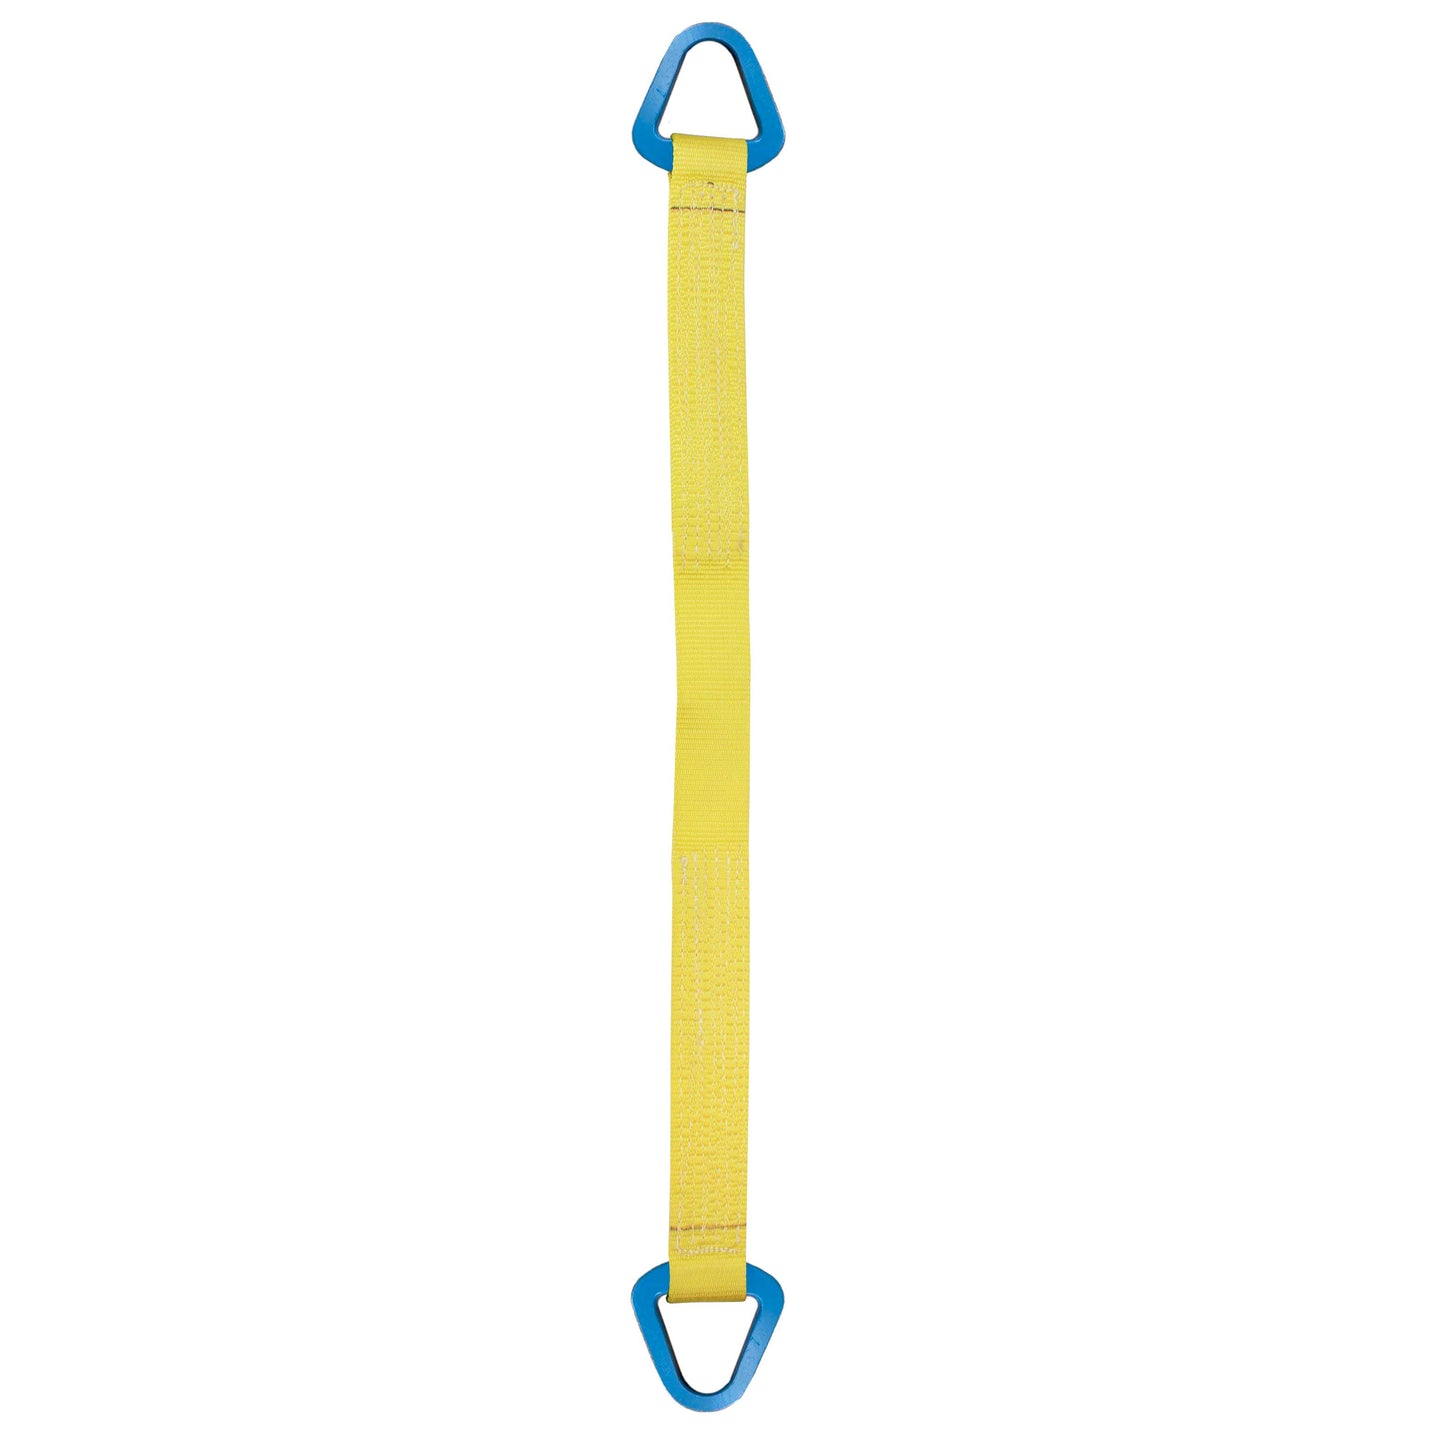 Nylon Lifting Sling Triangle 2 inch x 20 foot 2ply image 1 of 2